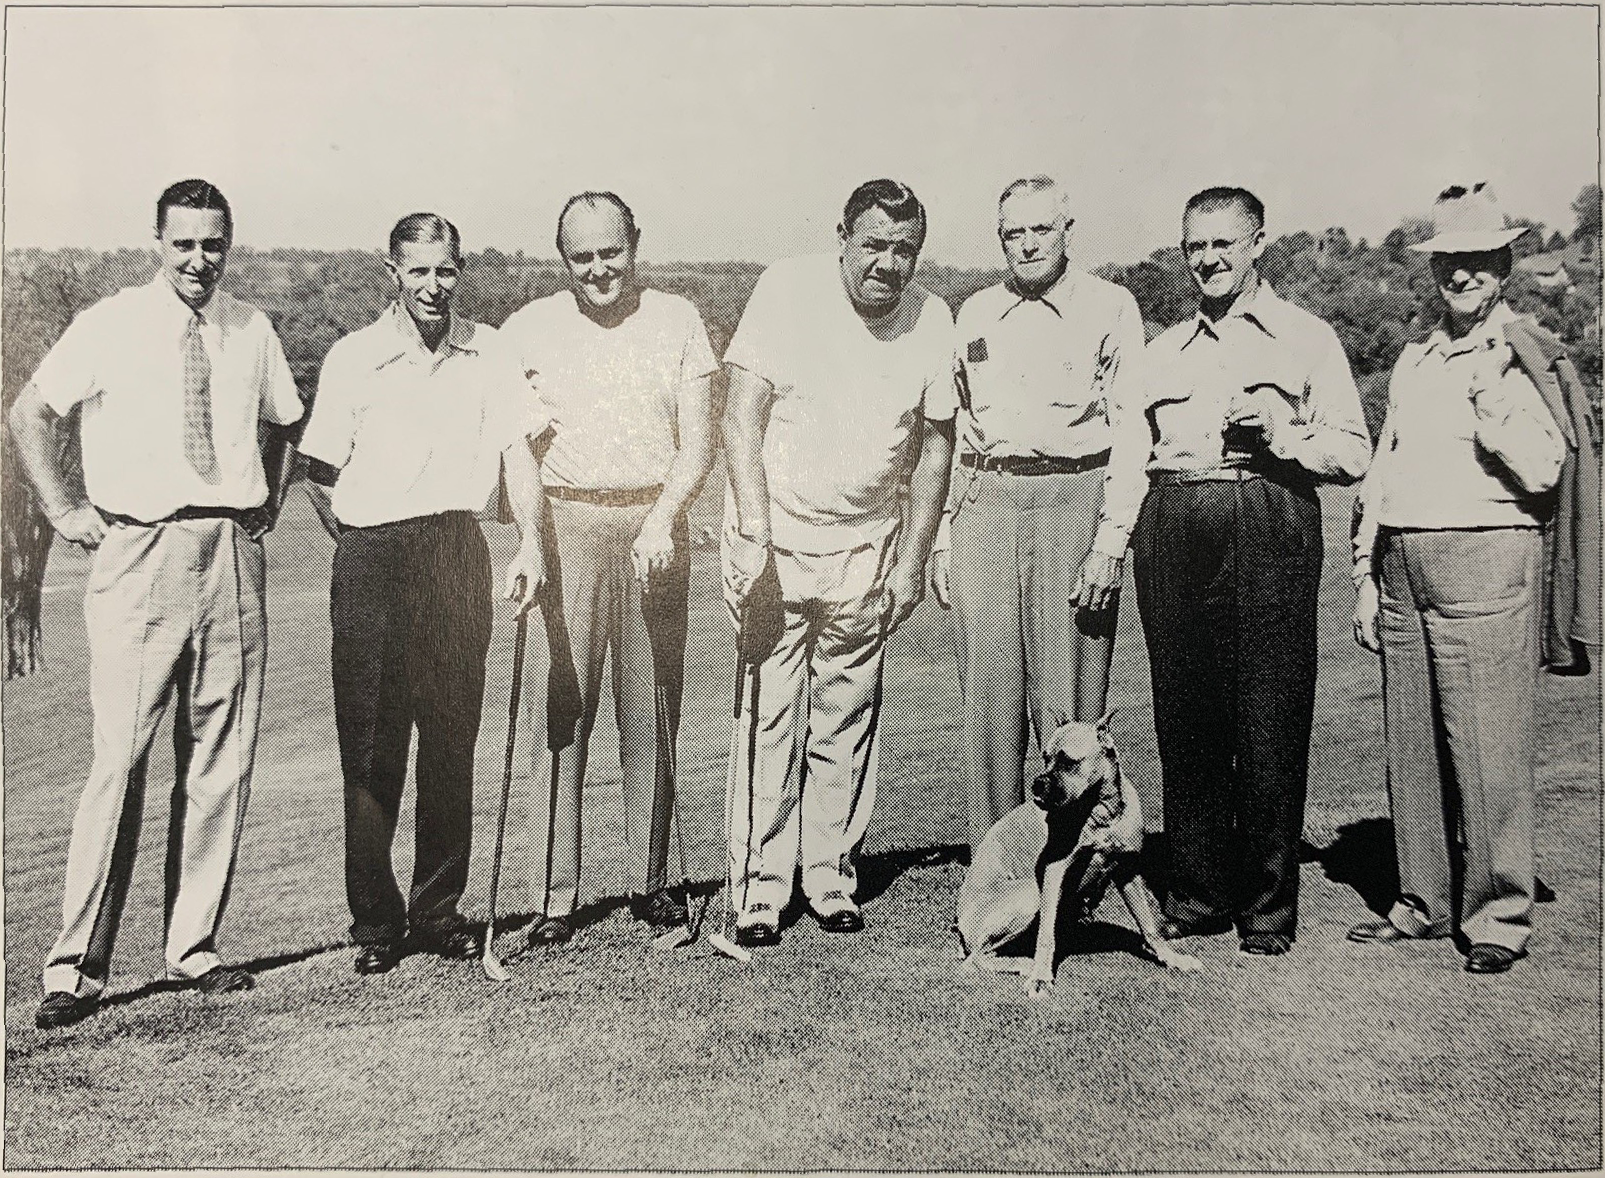 Black-and-white photo of Babe Ruth (center) with a group of other men and a dog, posing for a group photo on a Sussex County golf course. Source: “Sussex County: Images of Our Past Vol. 2,” published by NJ Herald (2009)